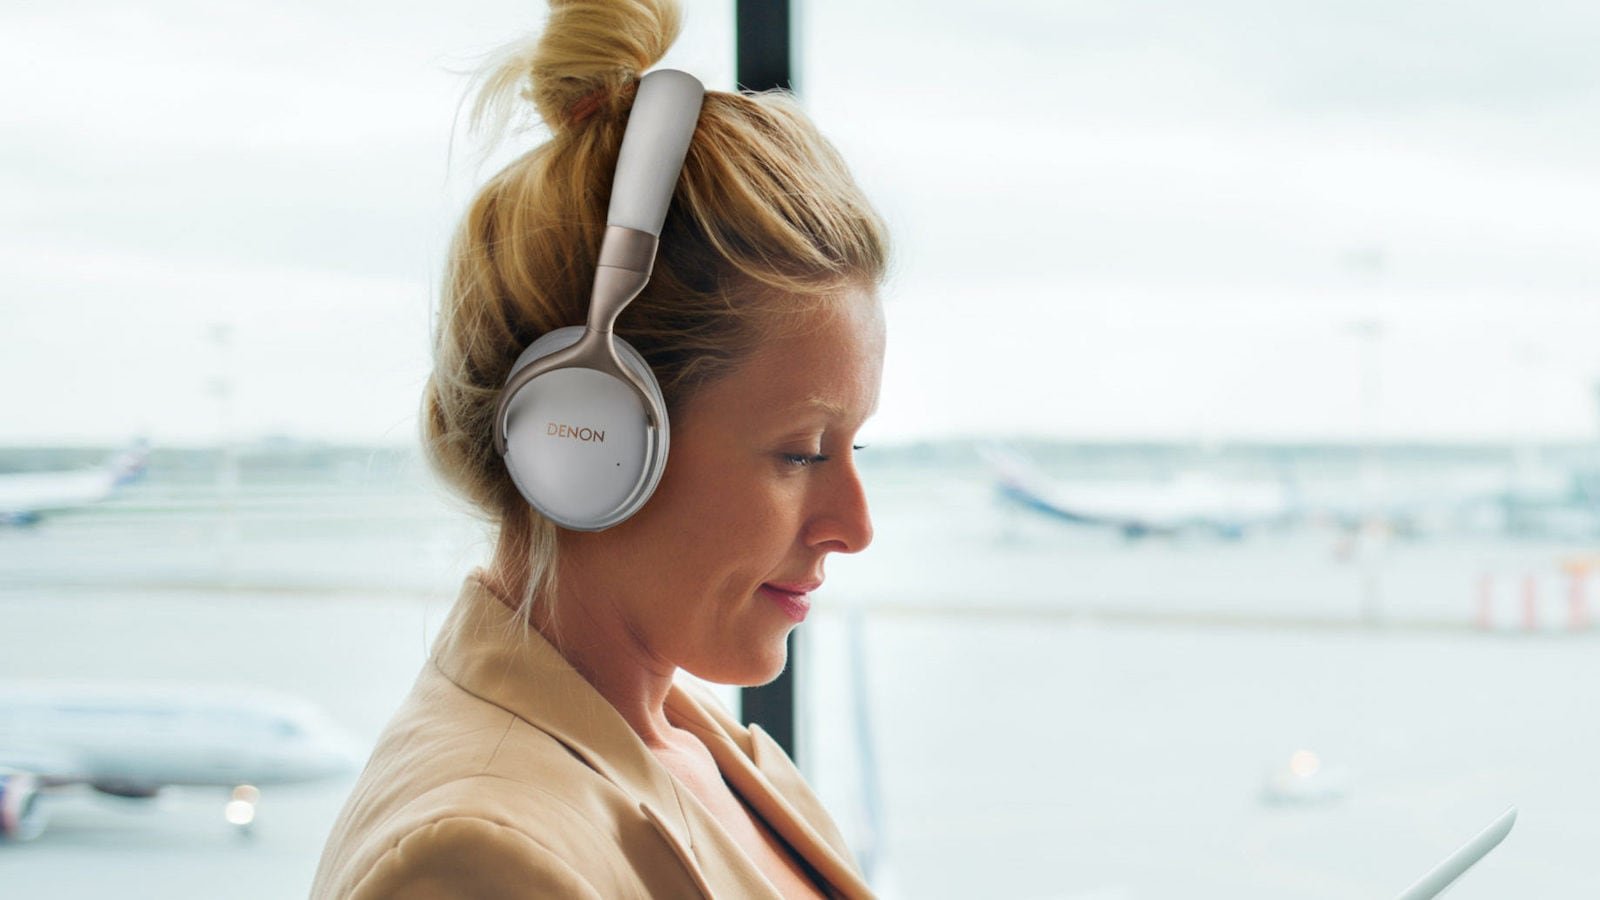 Denon AH-GC30 Noise-Canceling Headphones have FreeEdge drivers for great audio